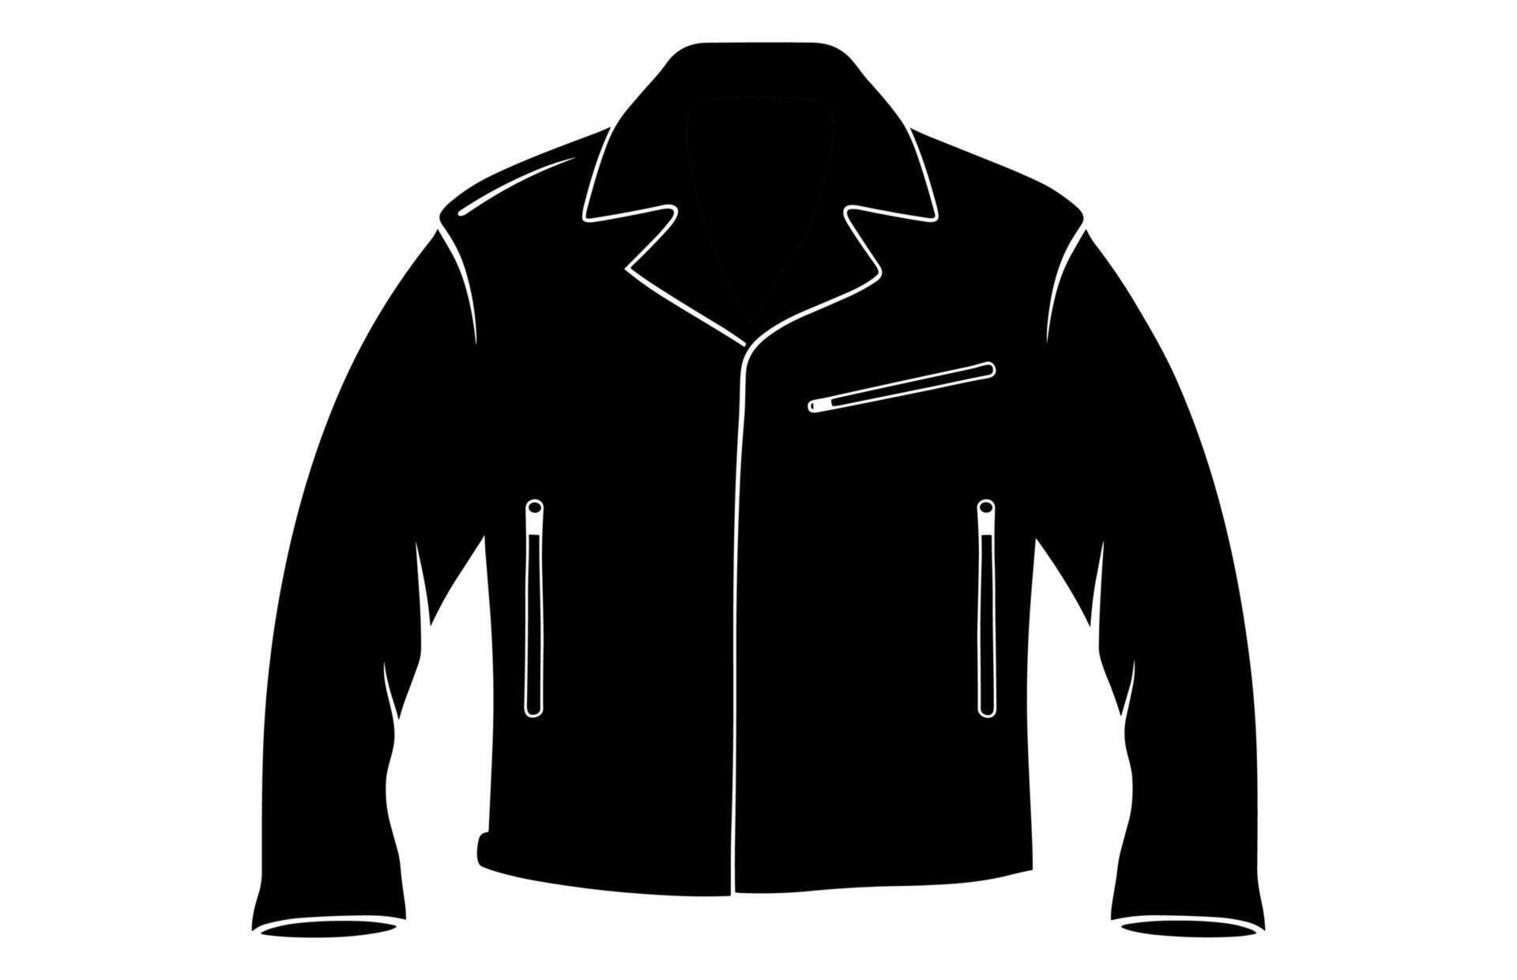 Leather Jacket Vector Silhouette Illustration, Men's casual clothing, Classic biker jacket.